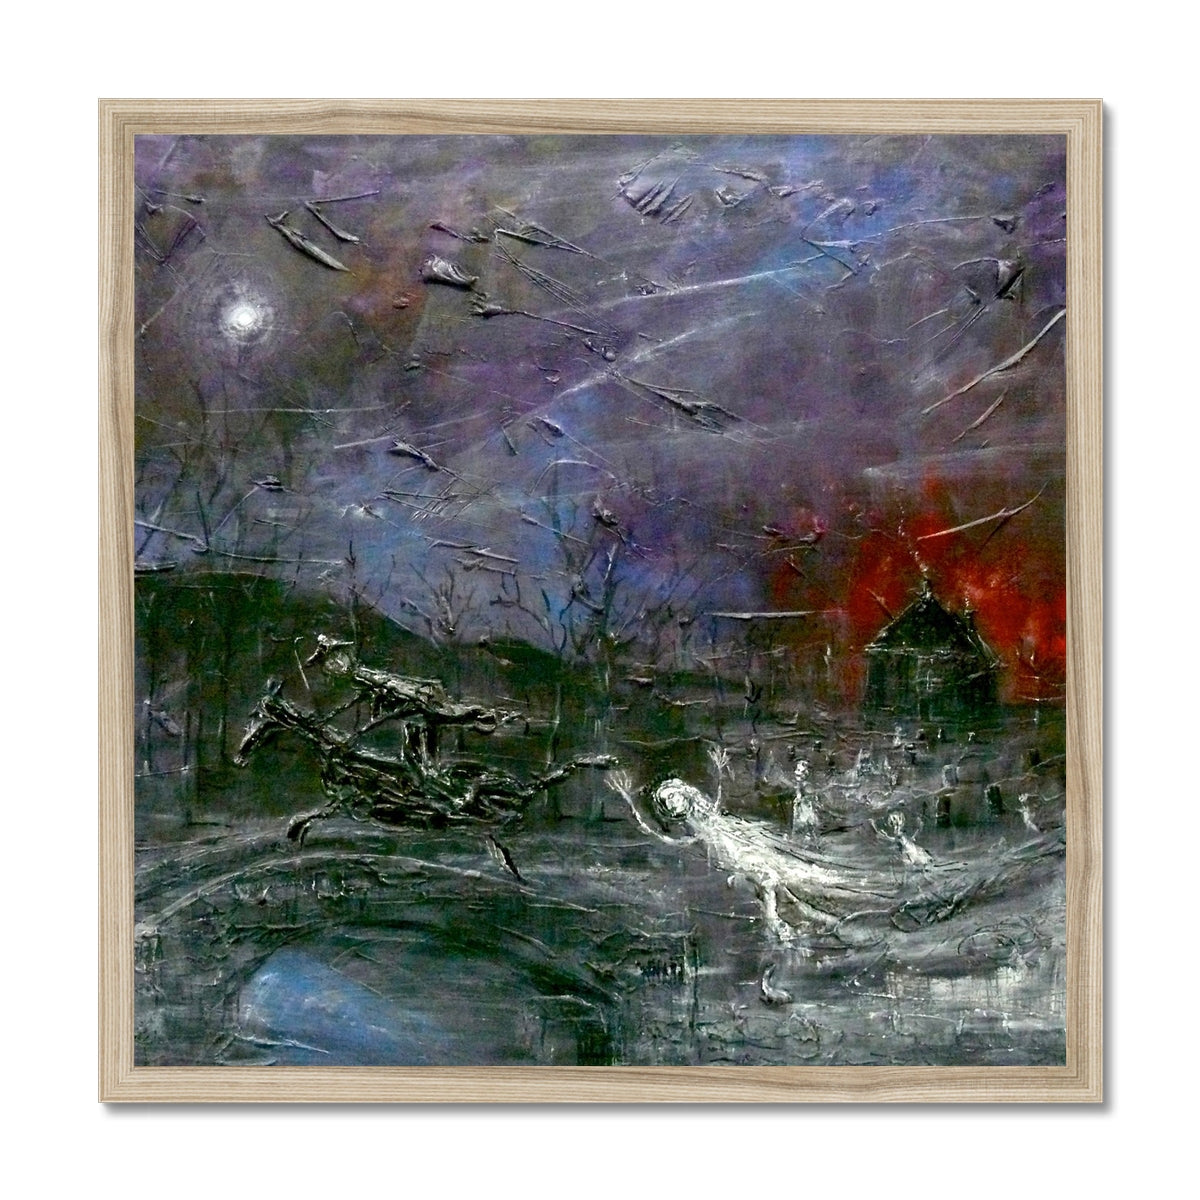 Tam O Shanter Painting | Framed Prints From Scotland-Framed Prints-Abstract & Impressionistic Art Gallery-20"x20"-Natural Frame-Paintings, Prints, Homeware, Art Gifts From Scotland By Scottish Artist Kevin Hunter